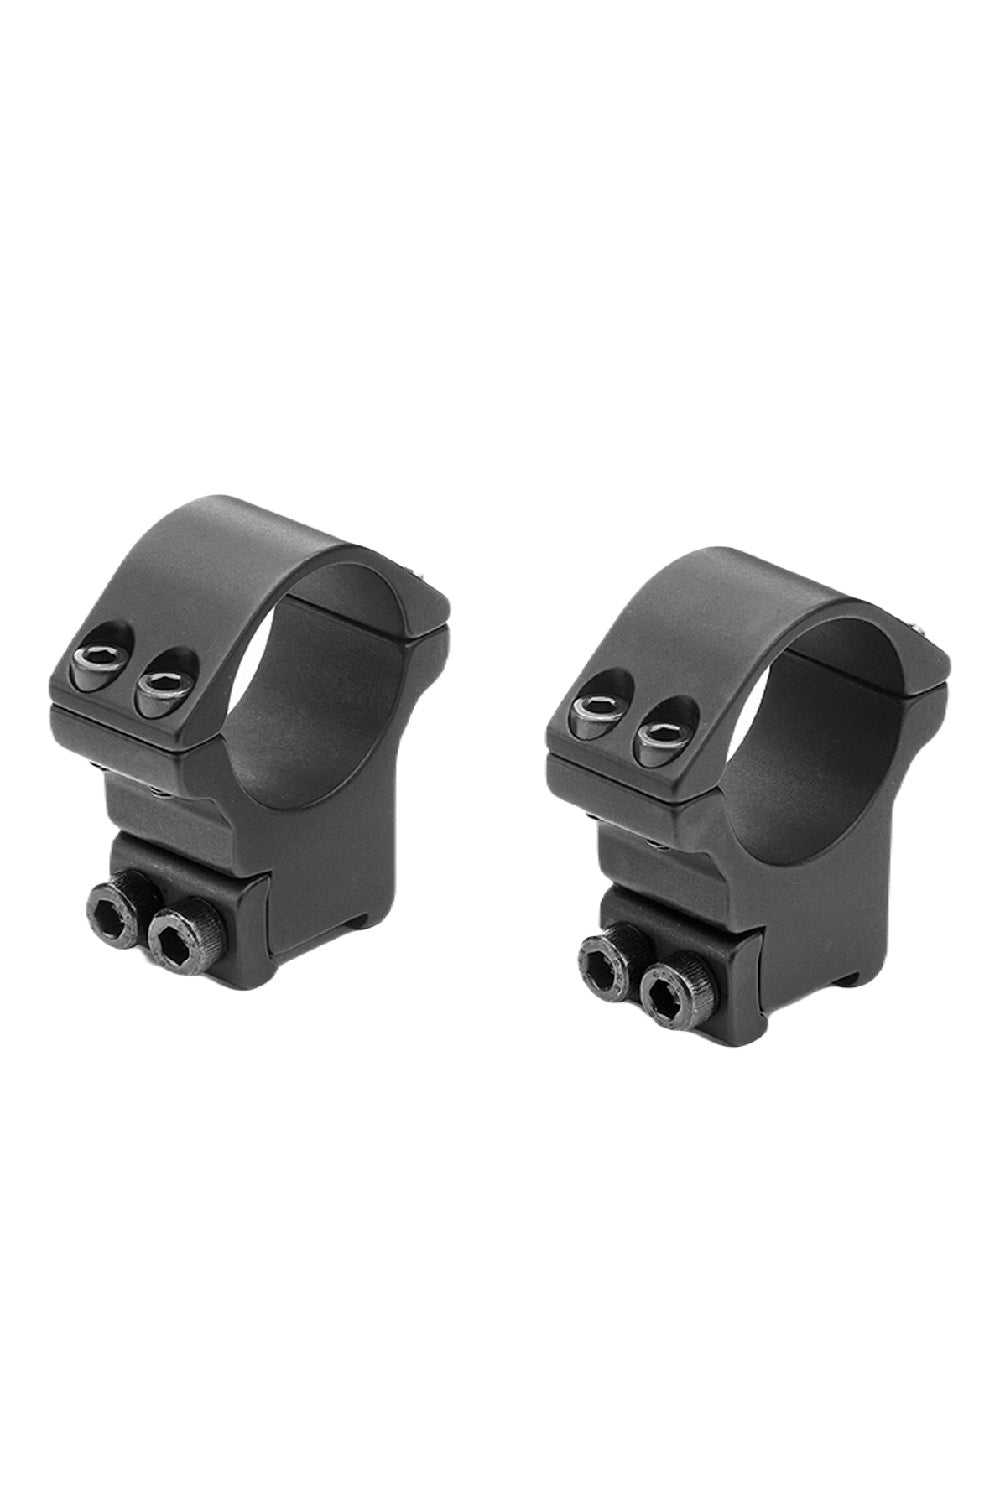 Bisley Two Piece High 30mm Mounts for 15mm Tikka